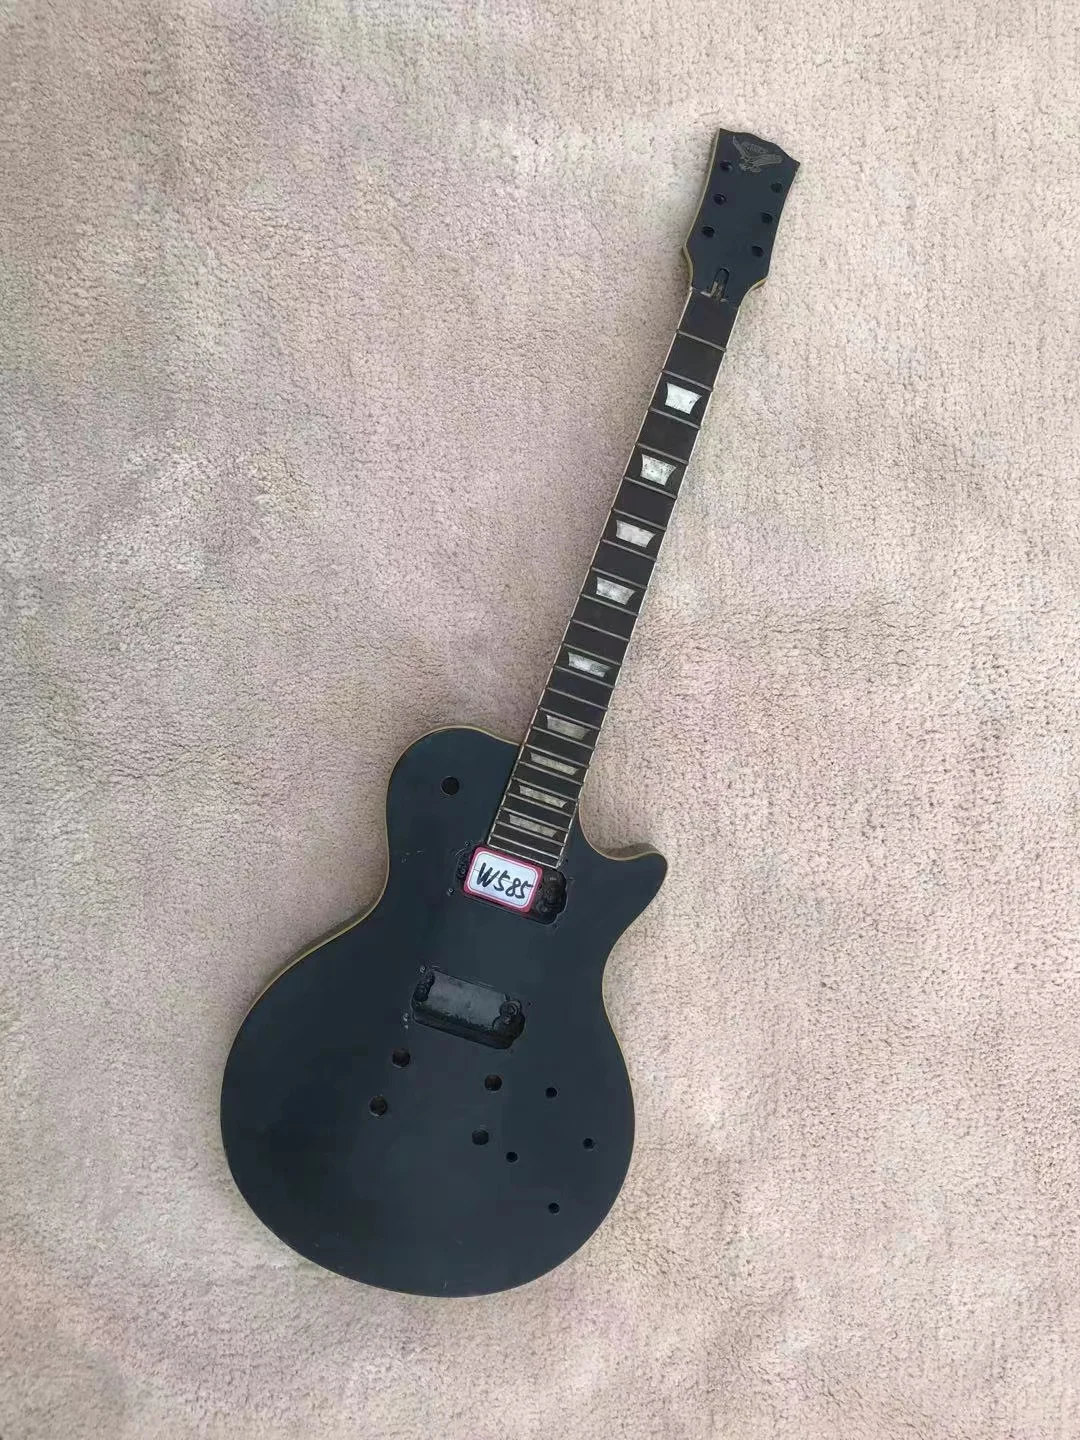 DIY (Not New) Custom Electric Guitar Black Beauty without Hardwares in Stock Discount Free Shipping W585